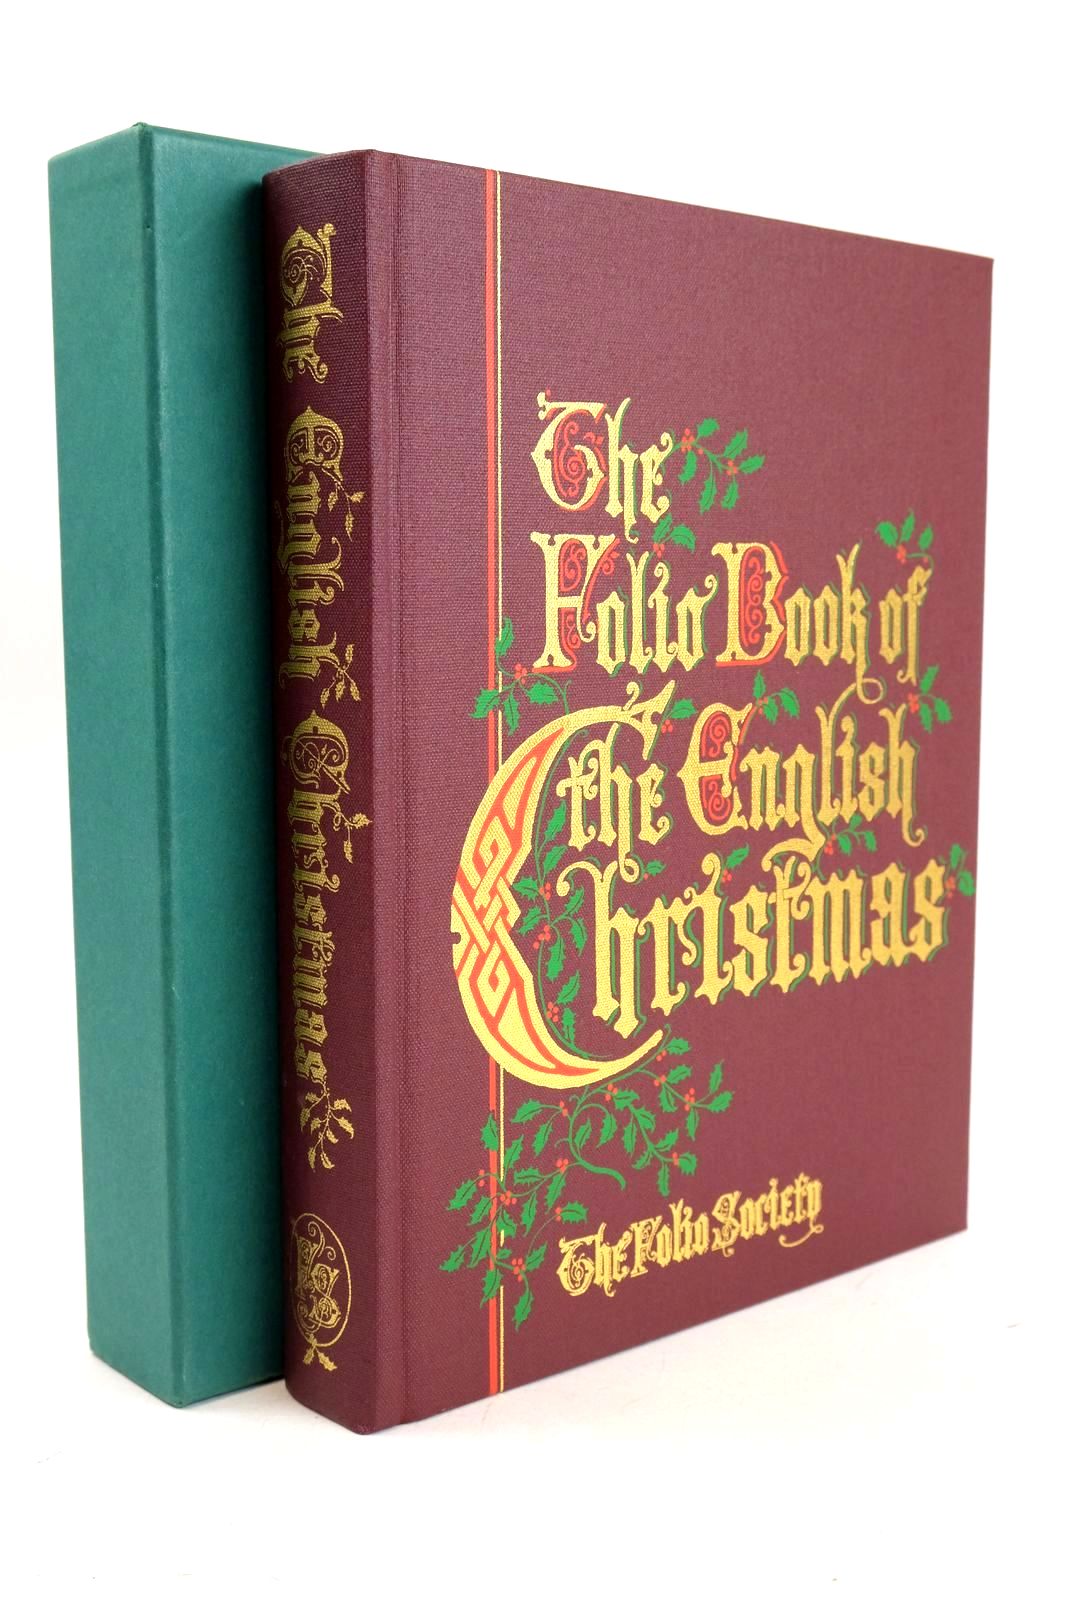 Photo of THE FOLIO BOOK OF THE ENGLISH CHRISTMAS written by Beare, Geraldine Lees, Edwin Lee, Laurie Farjeon, Eleanor Grahame, Kenneth James, Henry Eliot, George Dickens, Charles Beaton, Cecil et al,  illustrated by Holder, John published by Folio Society (STOCK CODE: 1326765)  for sale by Stella & Rose's Books